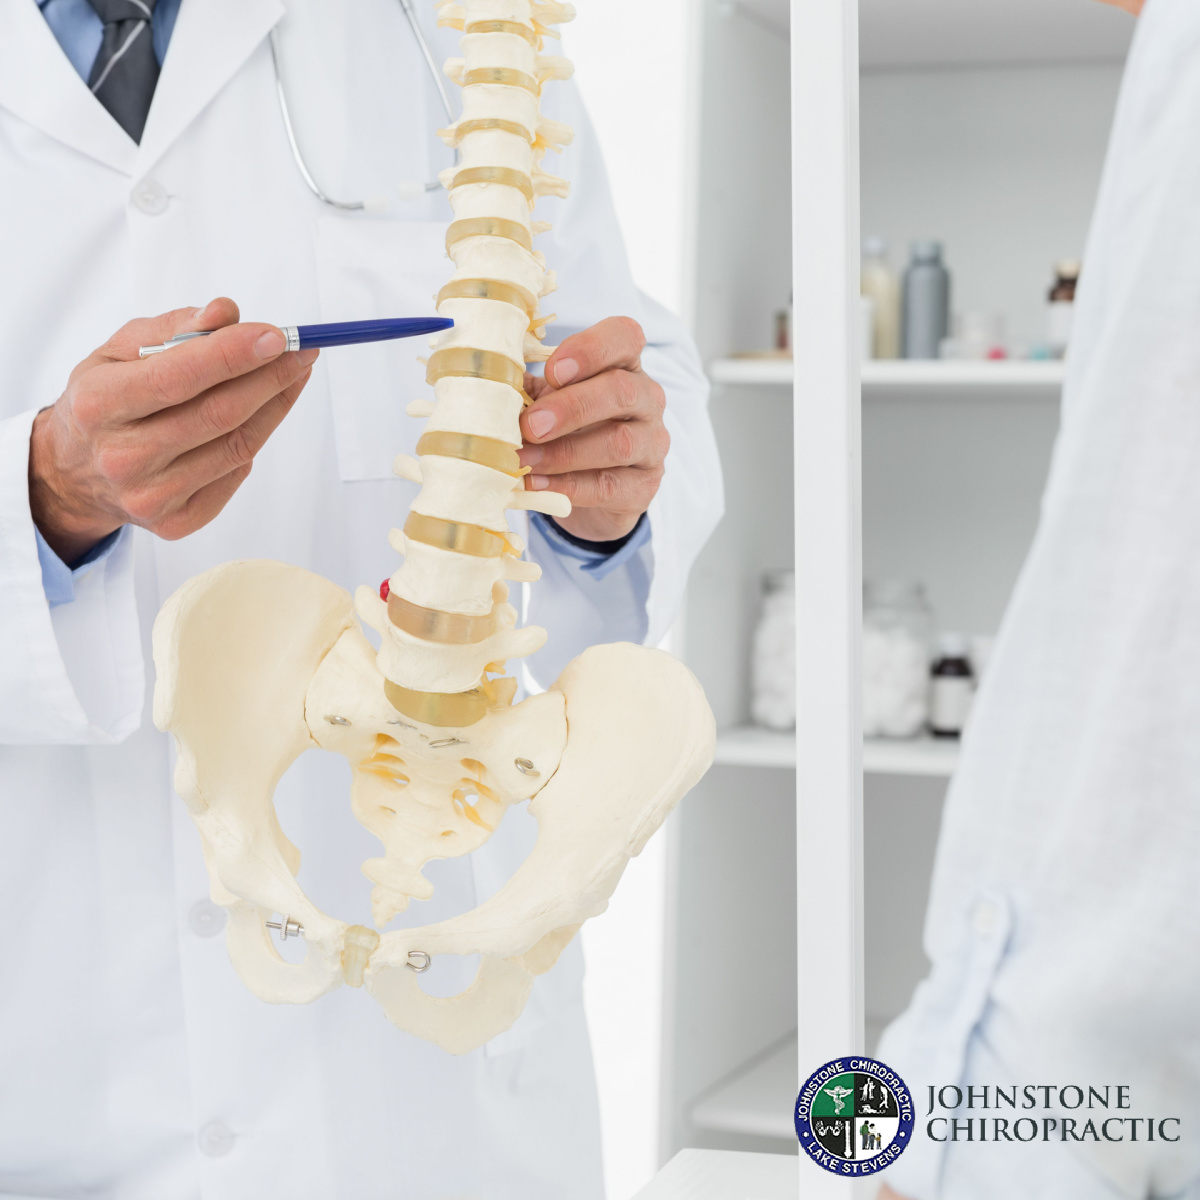 Trust Johnstone Chiropractic for Everyday Treatments and Services